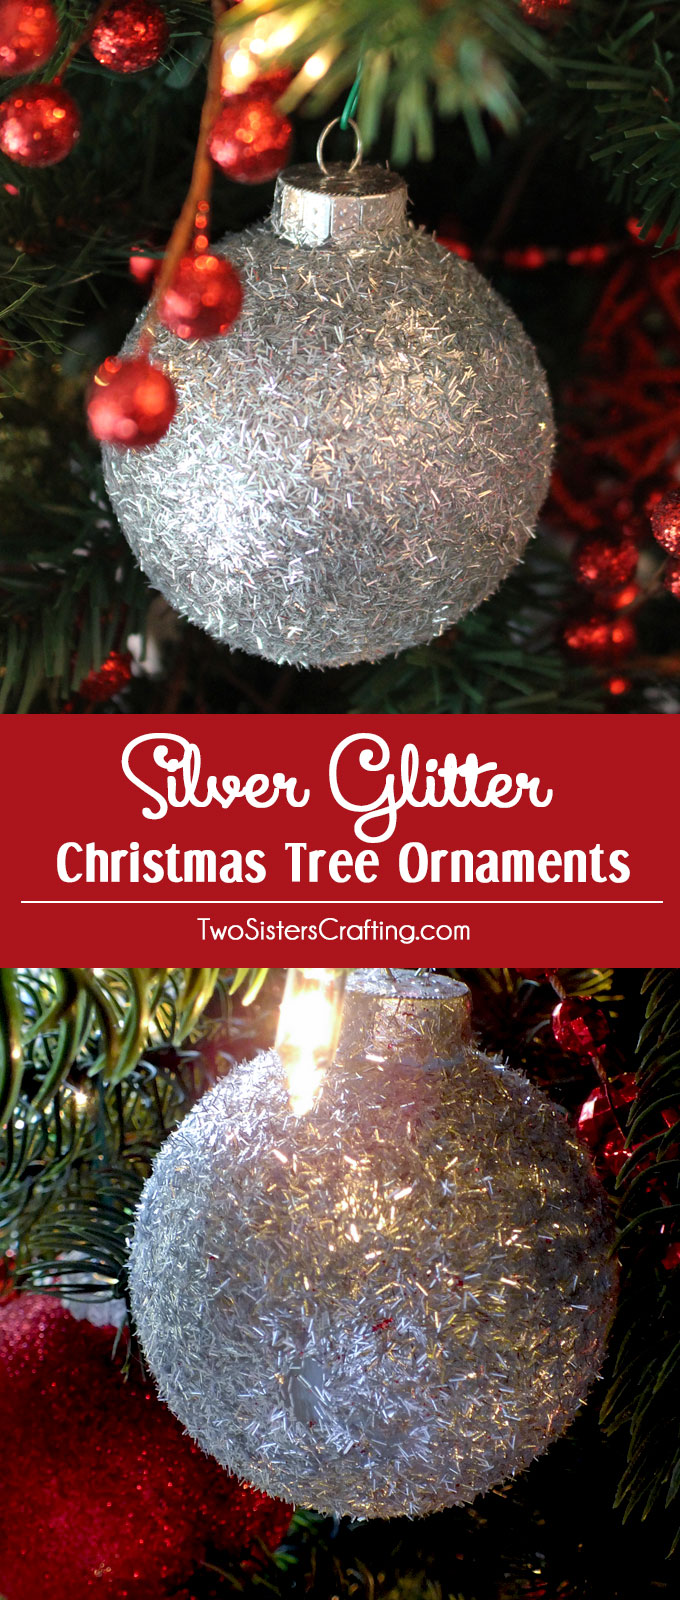 Download Silver Glitter Christmas Tree Ornaments - Two Sisters